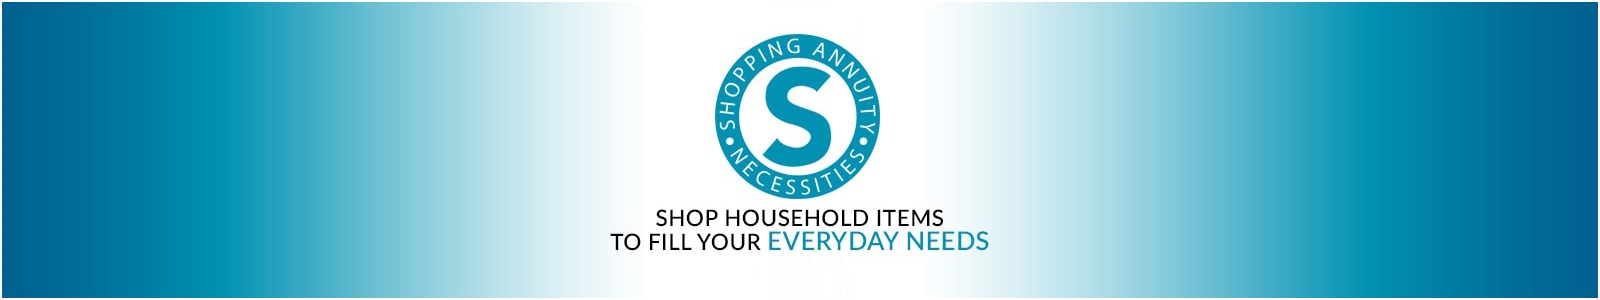 shop household items to fill your everyday needs